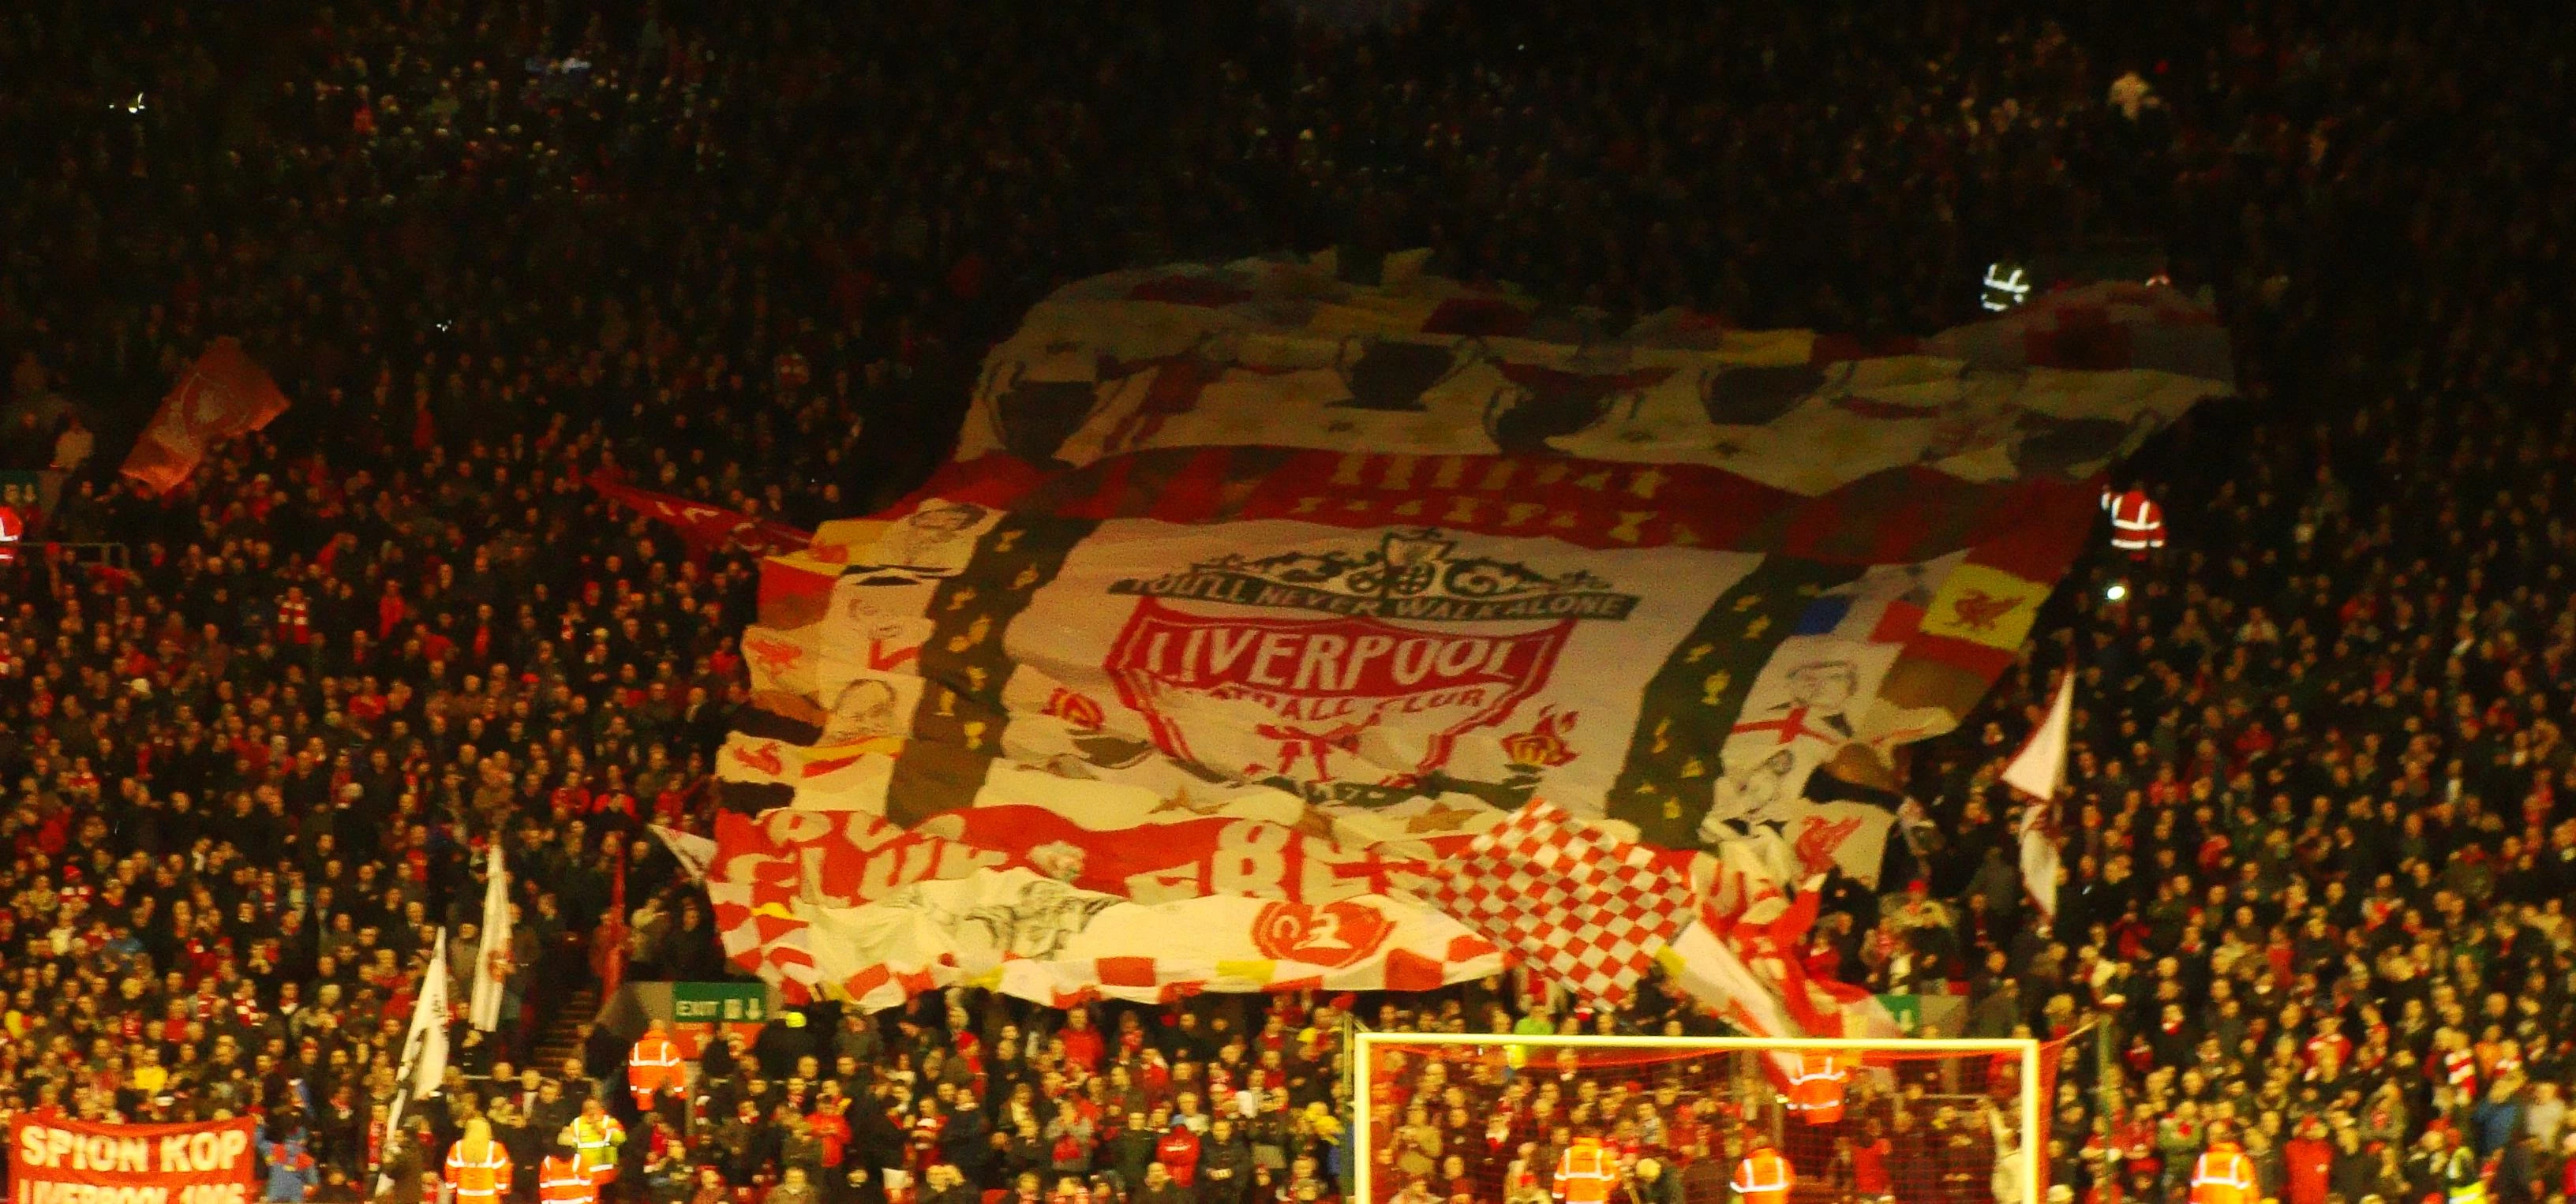 The Liverpool crest banner at the Kop, Anfield